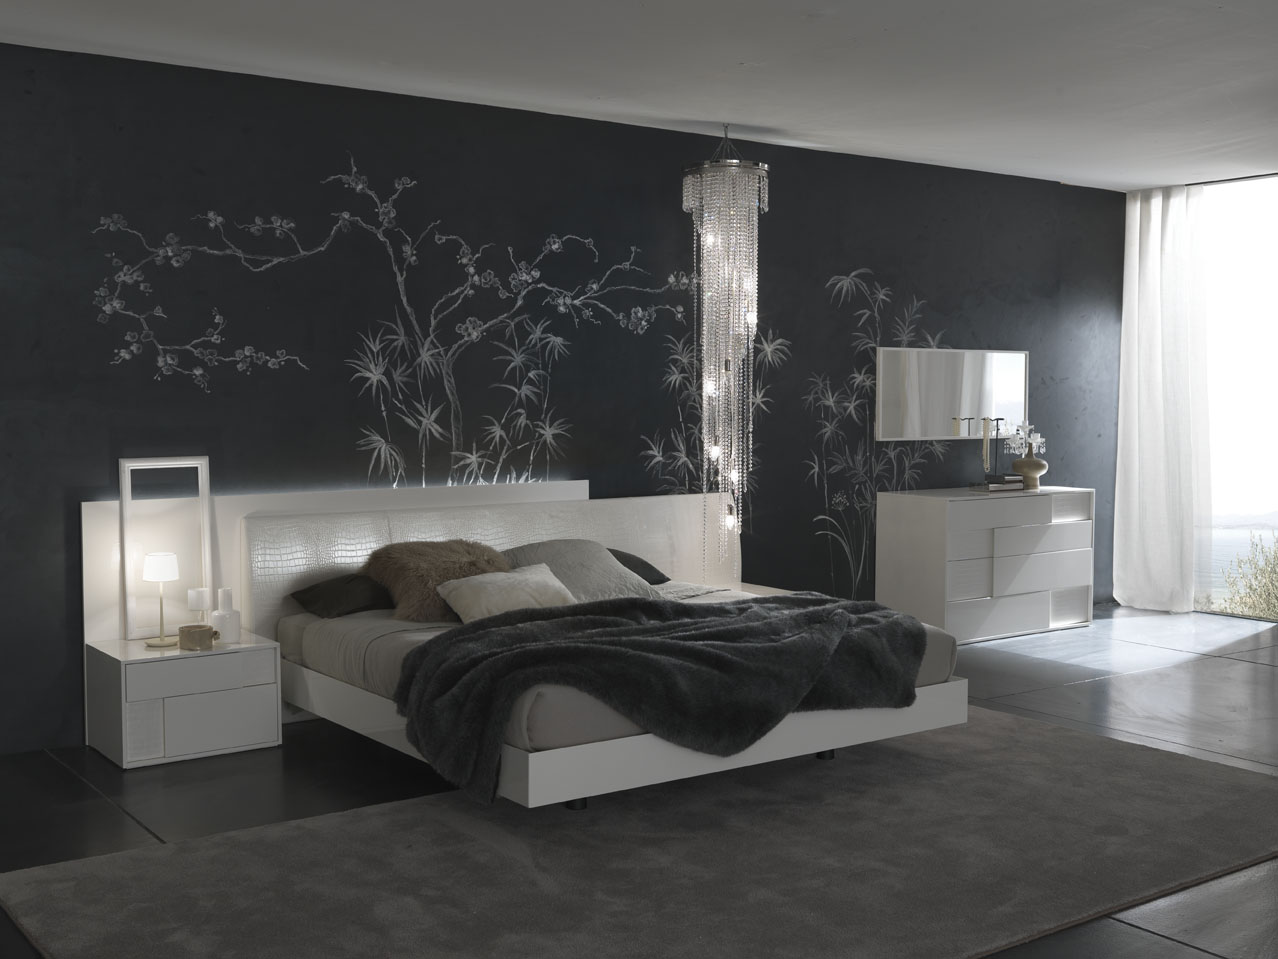 Black White Ideas Adorable Black White Men's Bedroom Ideas With Tree Wall Decal Furnished With King Bed And Nightstand Completed With Rug And Crystal Chandelier Lighting Bedroom Mens Bedroom Ideas: The Design Character